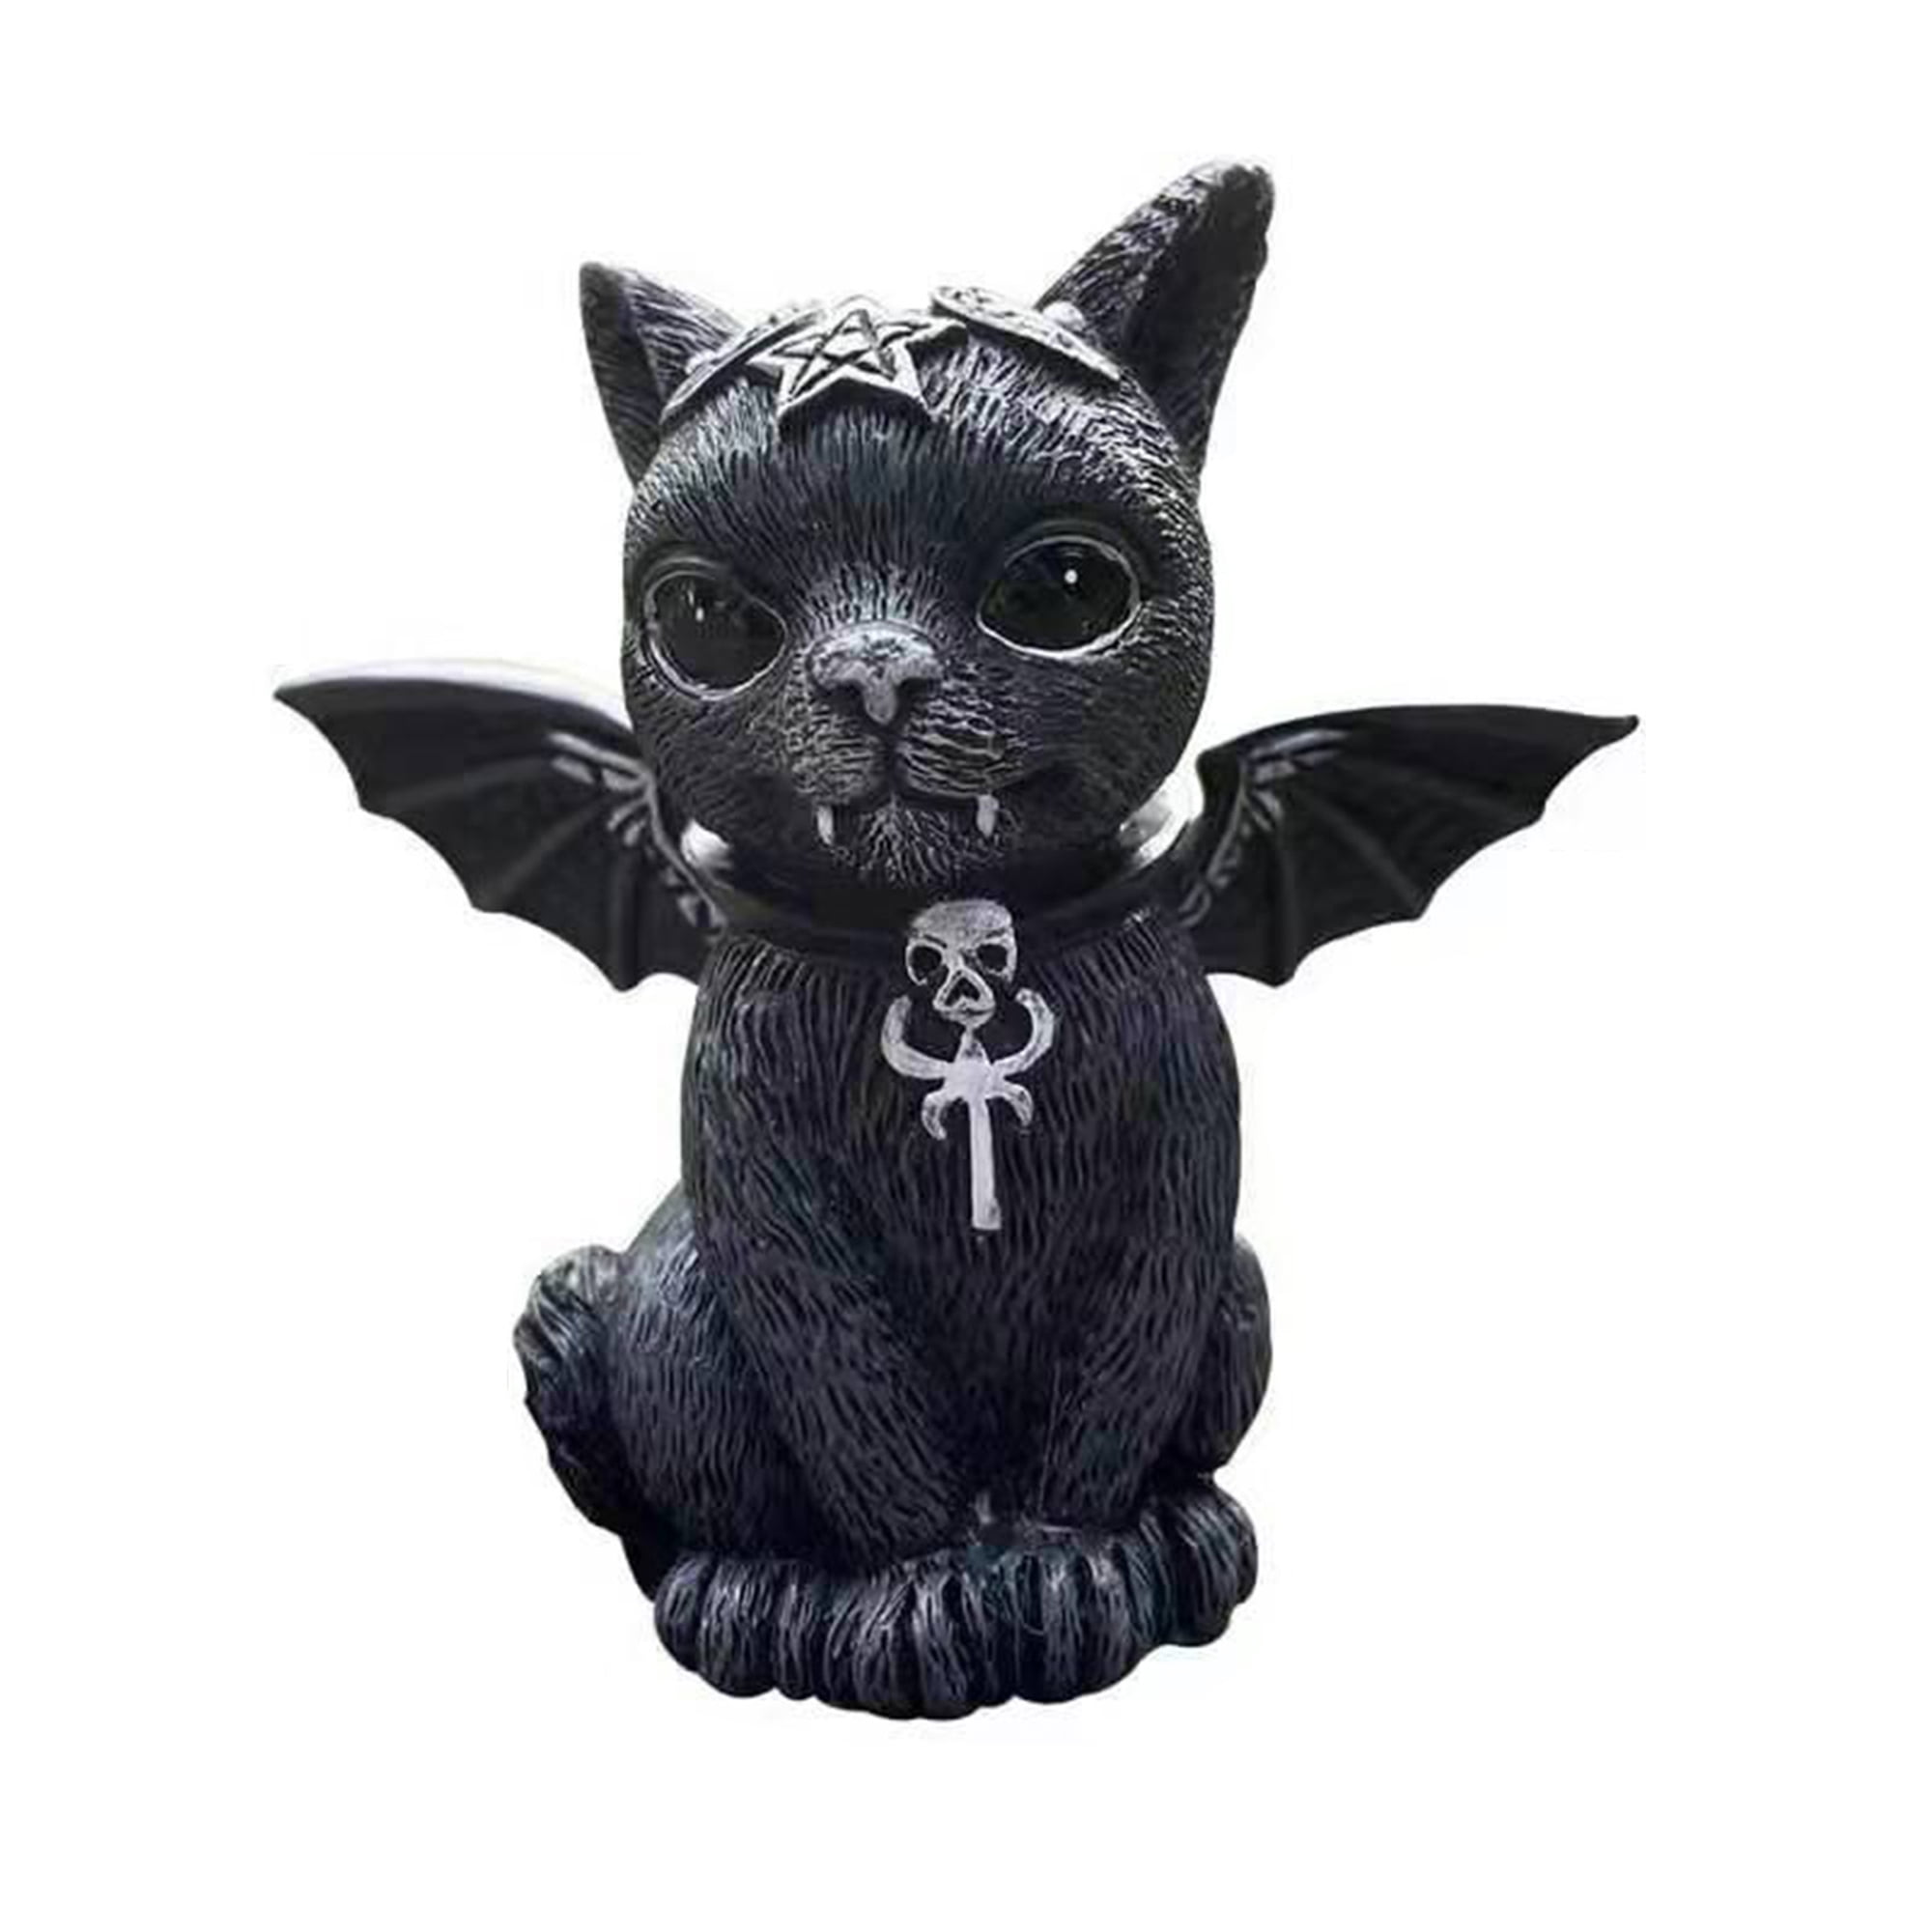 Collectible Gothic Ornament Steampunk Cat Figurine Stunning Cogsmiths Cat 